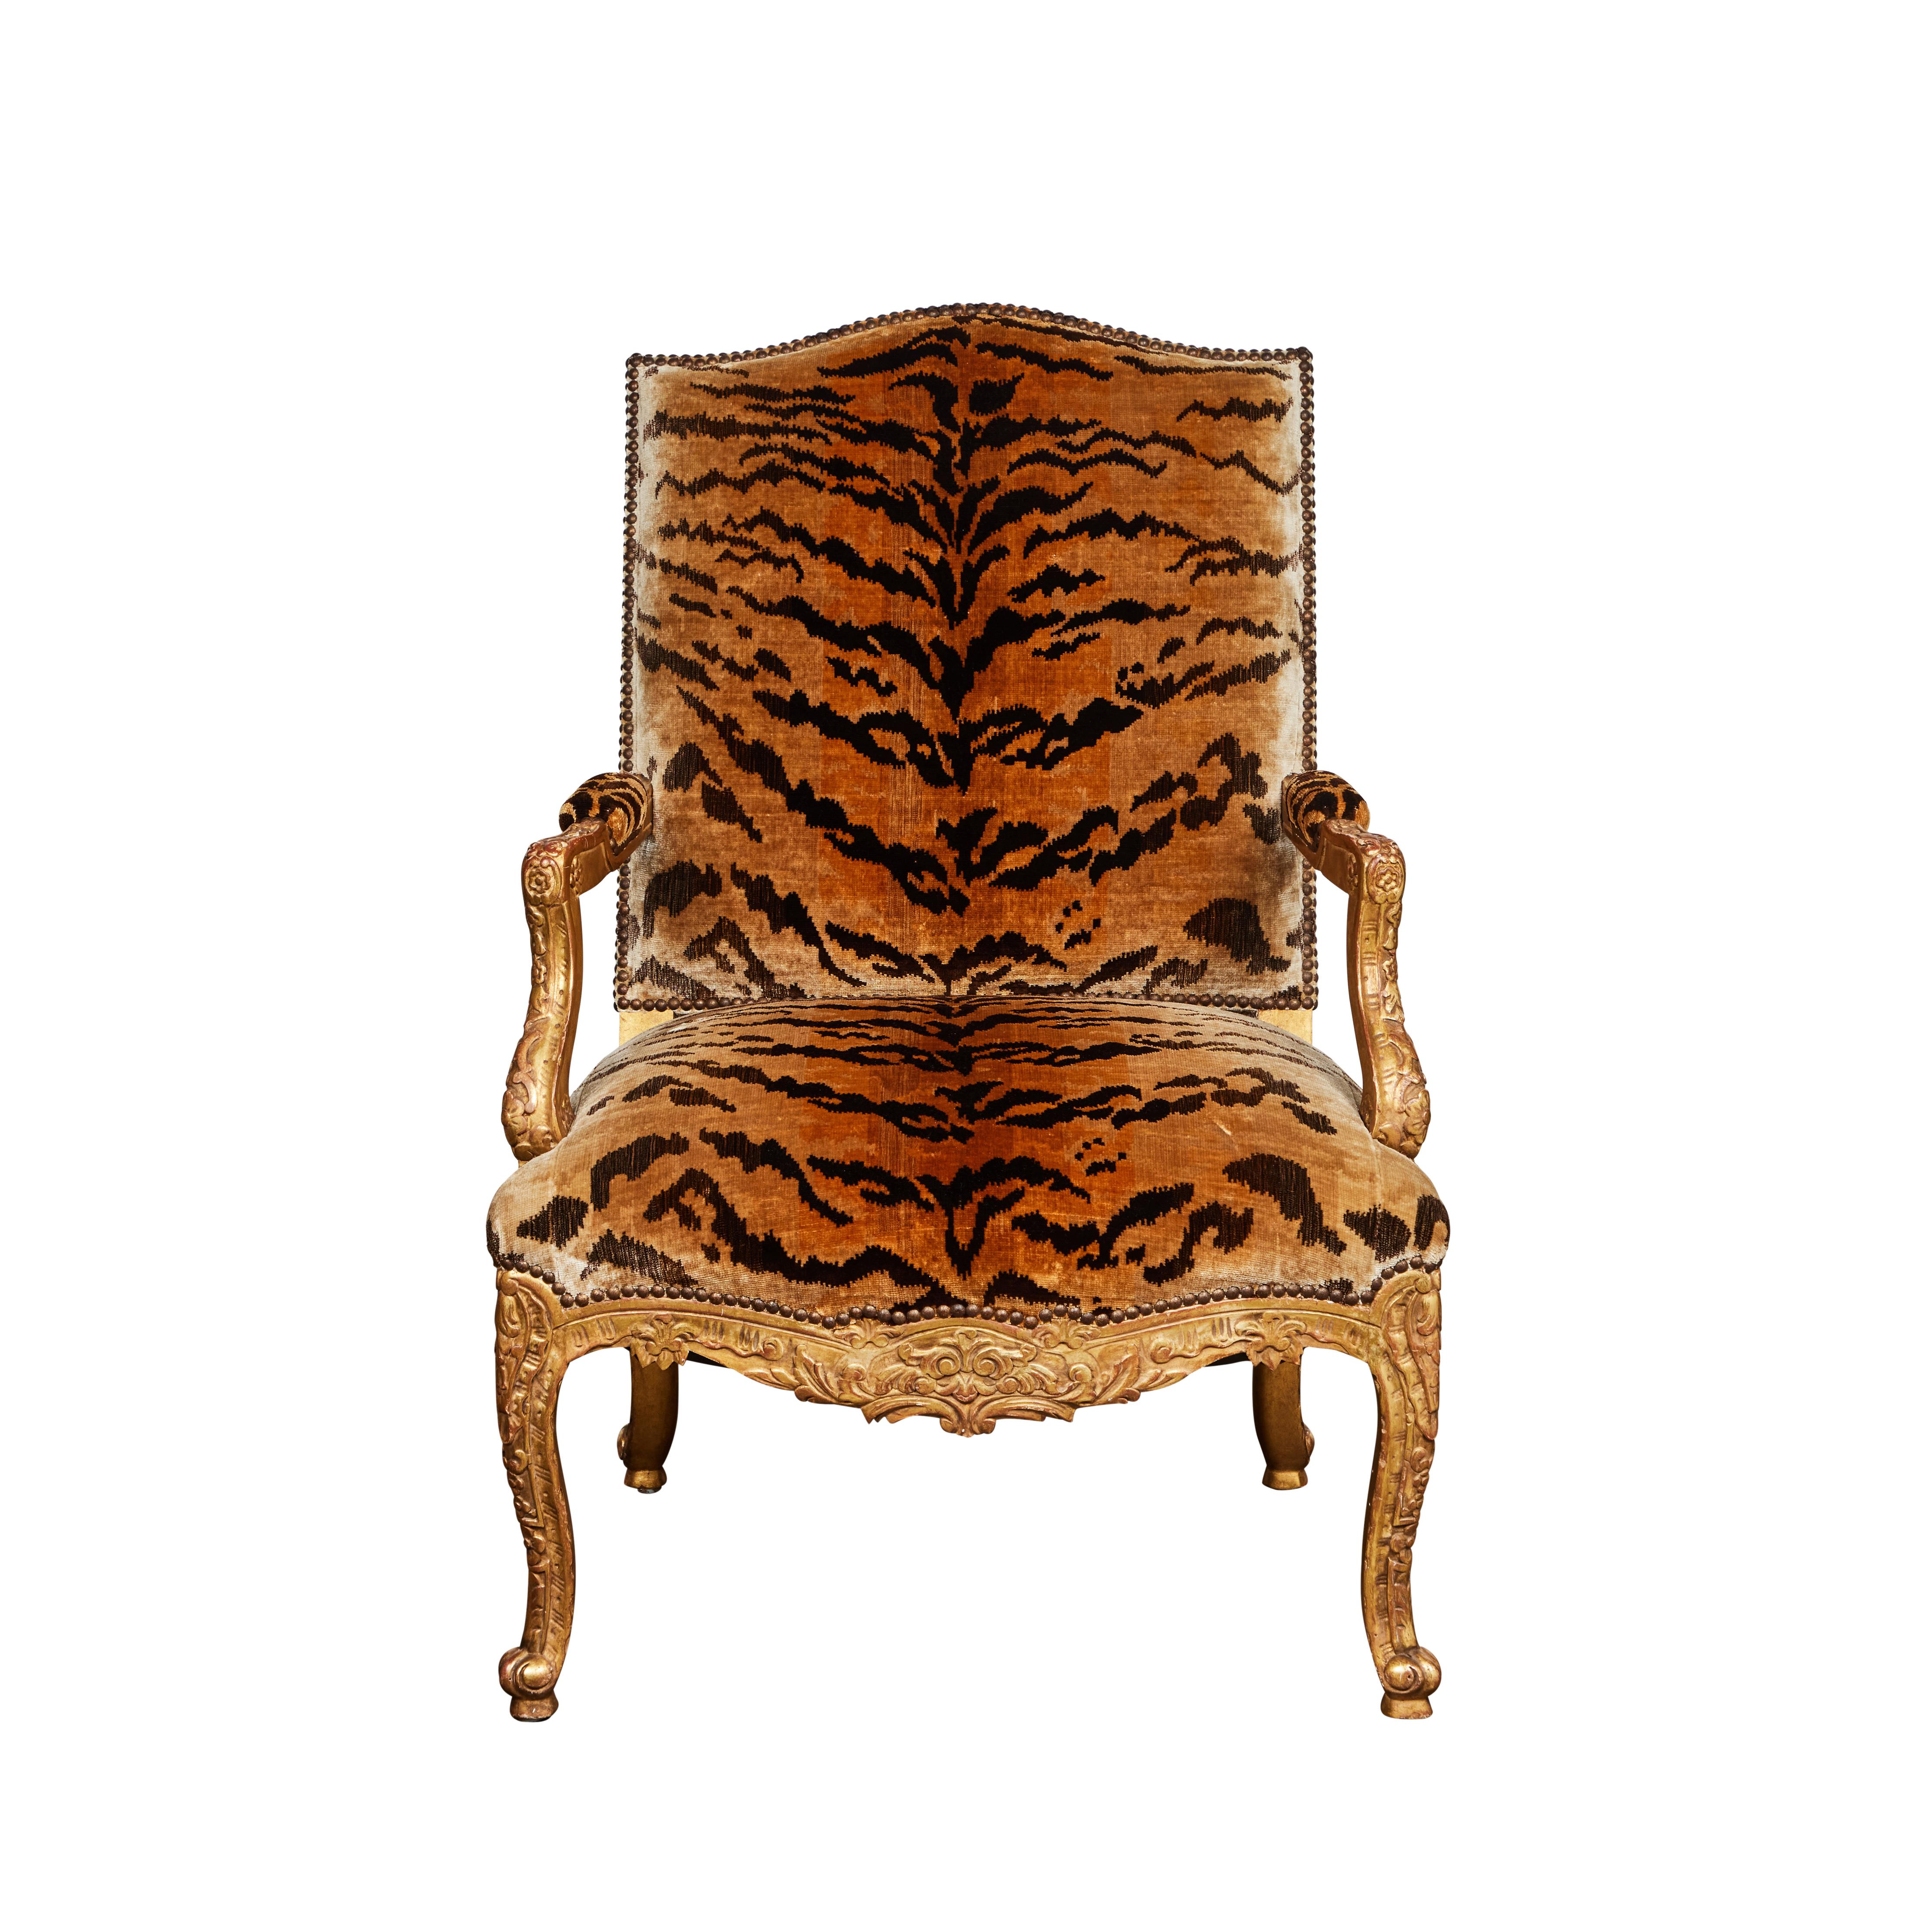 A French, hand carved, gessoed and gilded Baroque style armchair upholstered in Brunschwig and Fils silk tiger velvet